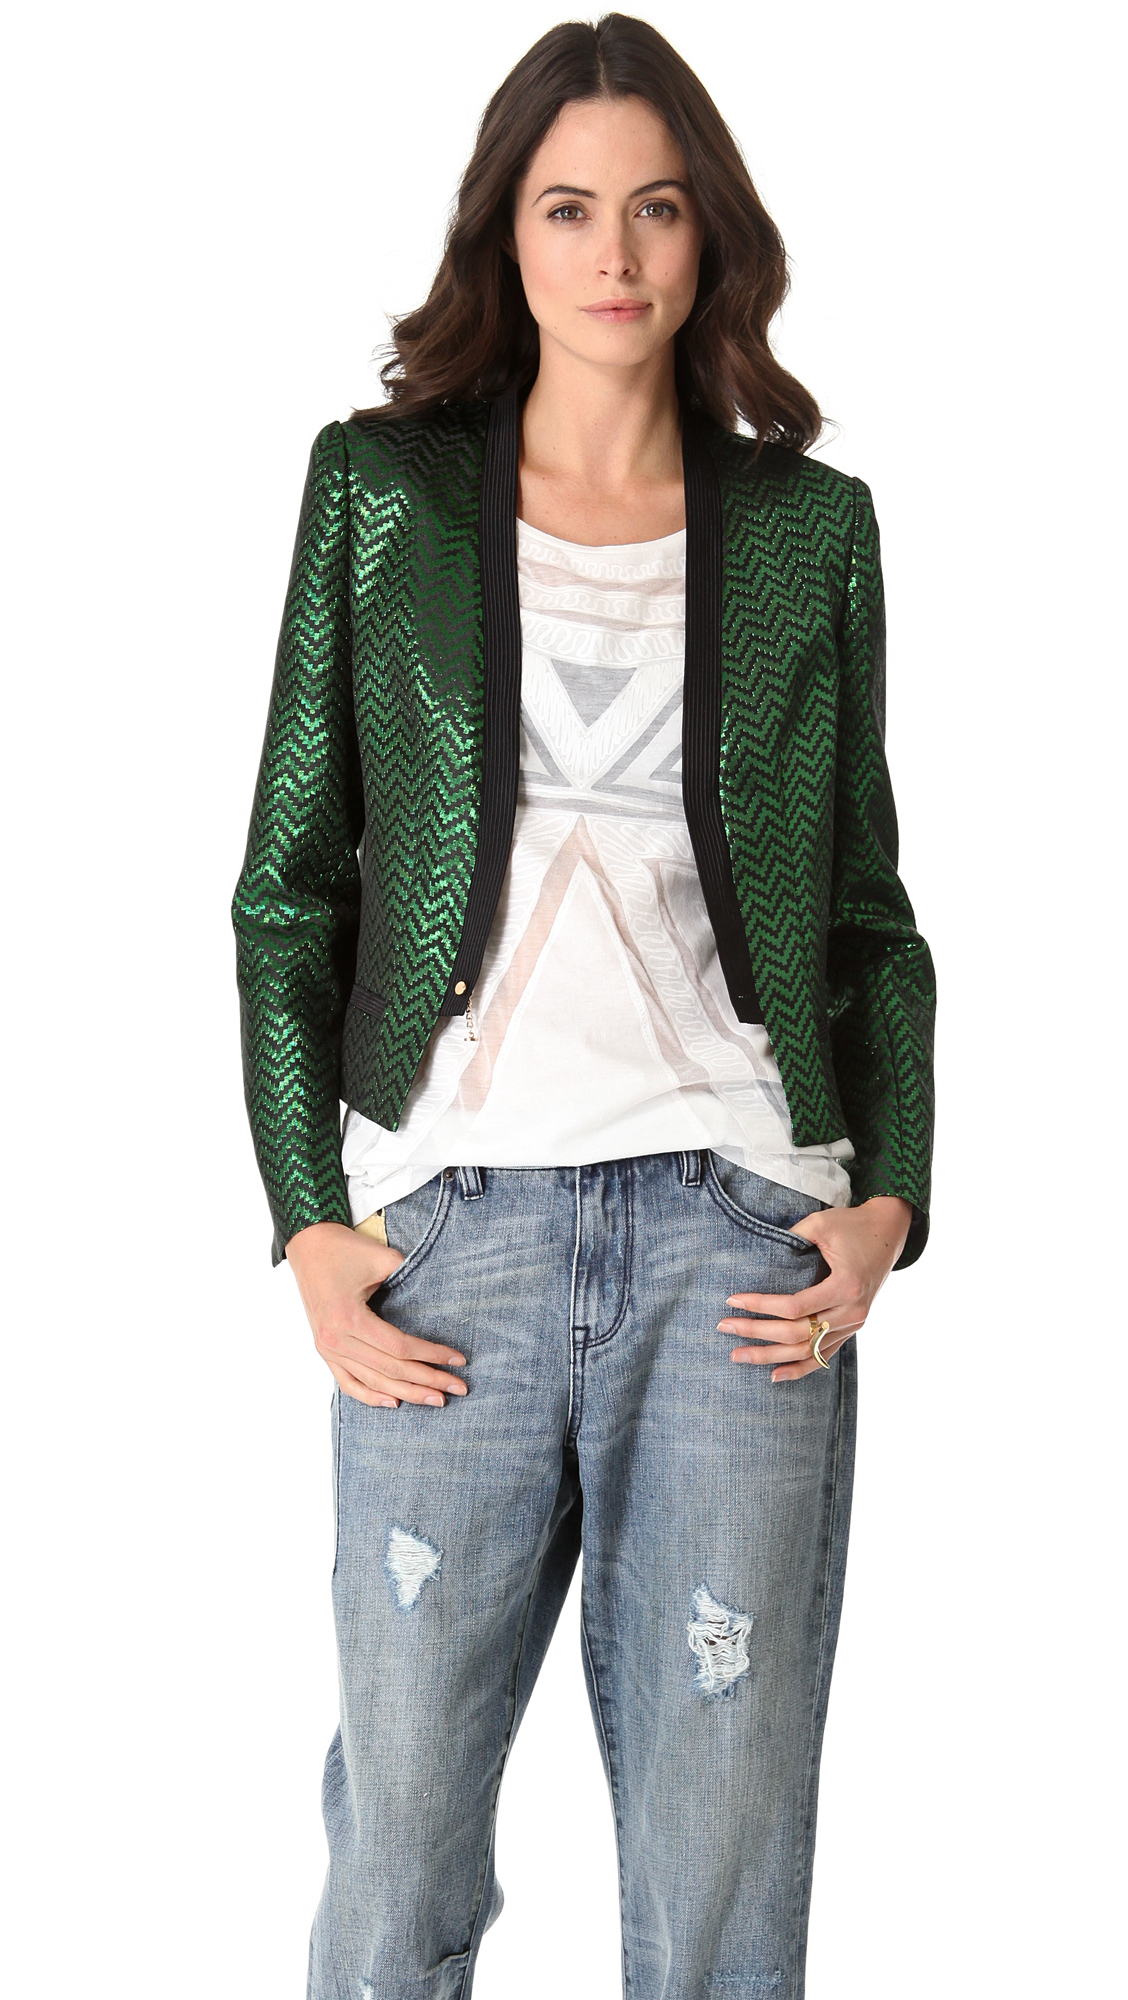 Lyst - Sass & Bide The Ruler Jacket in Green